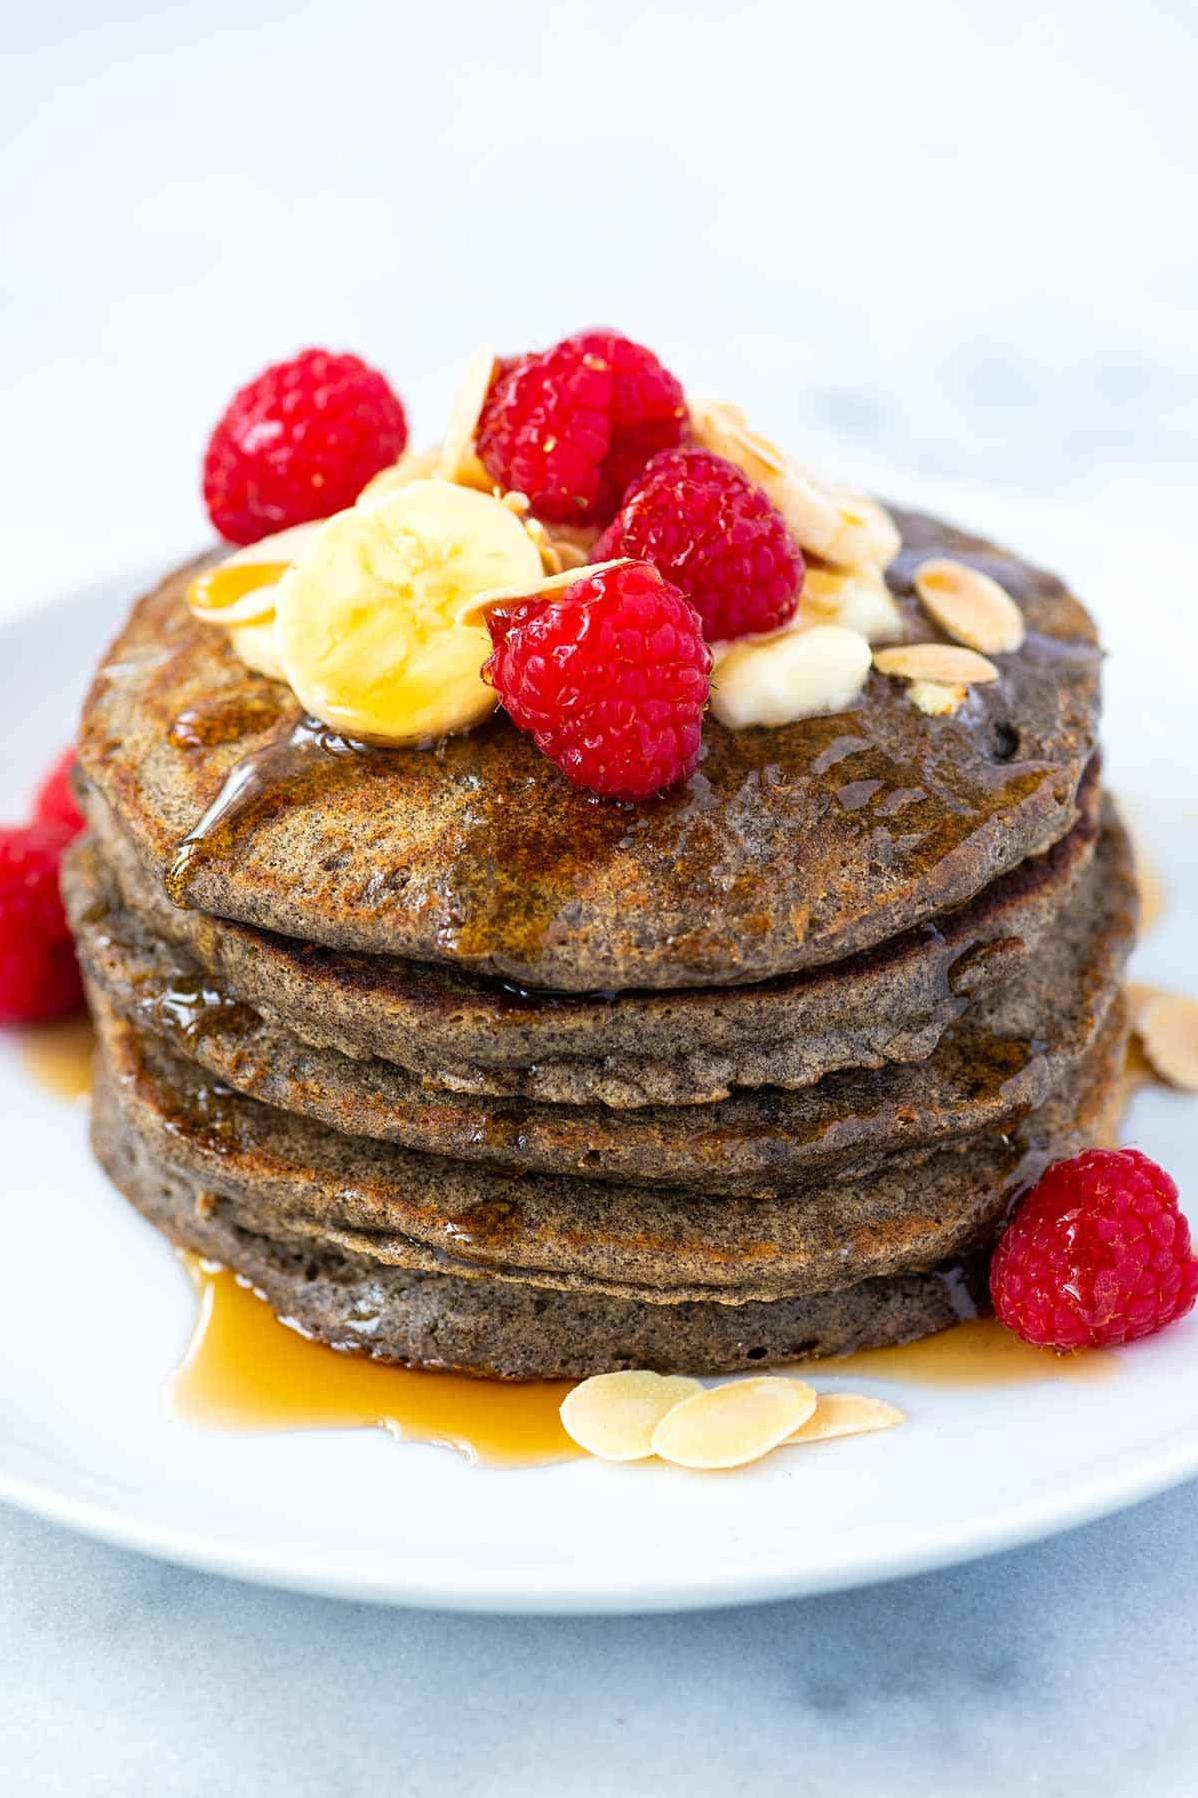  Fluffy and delicious gluten-free buttermilk buckwheat pancakes!